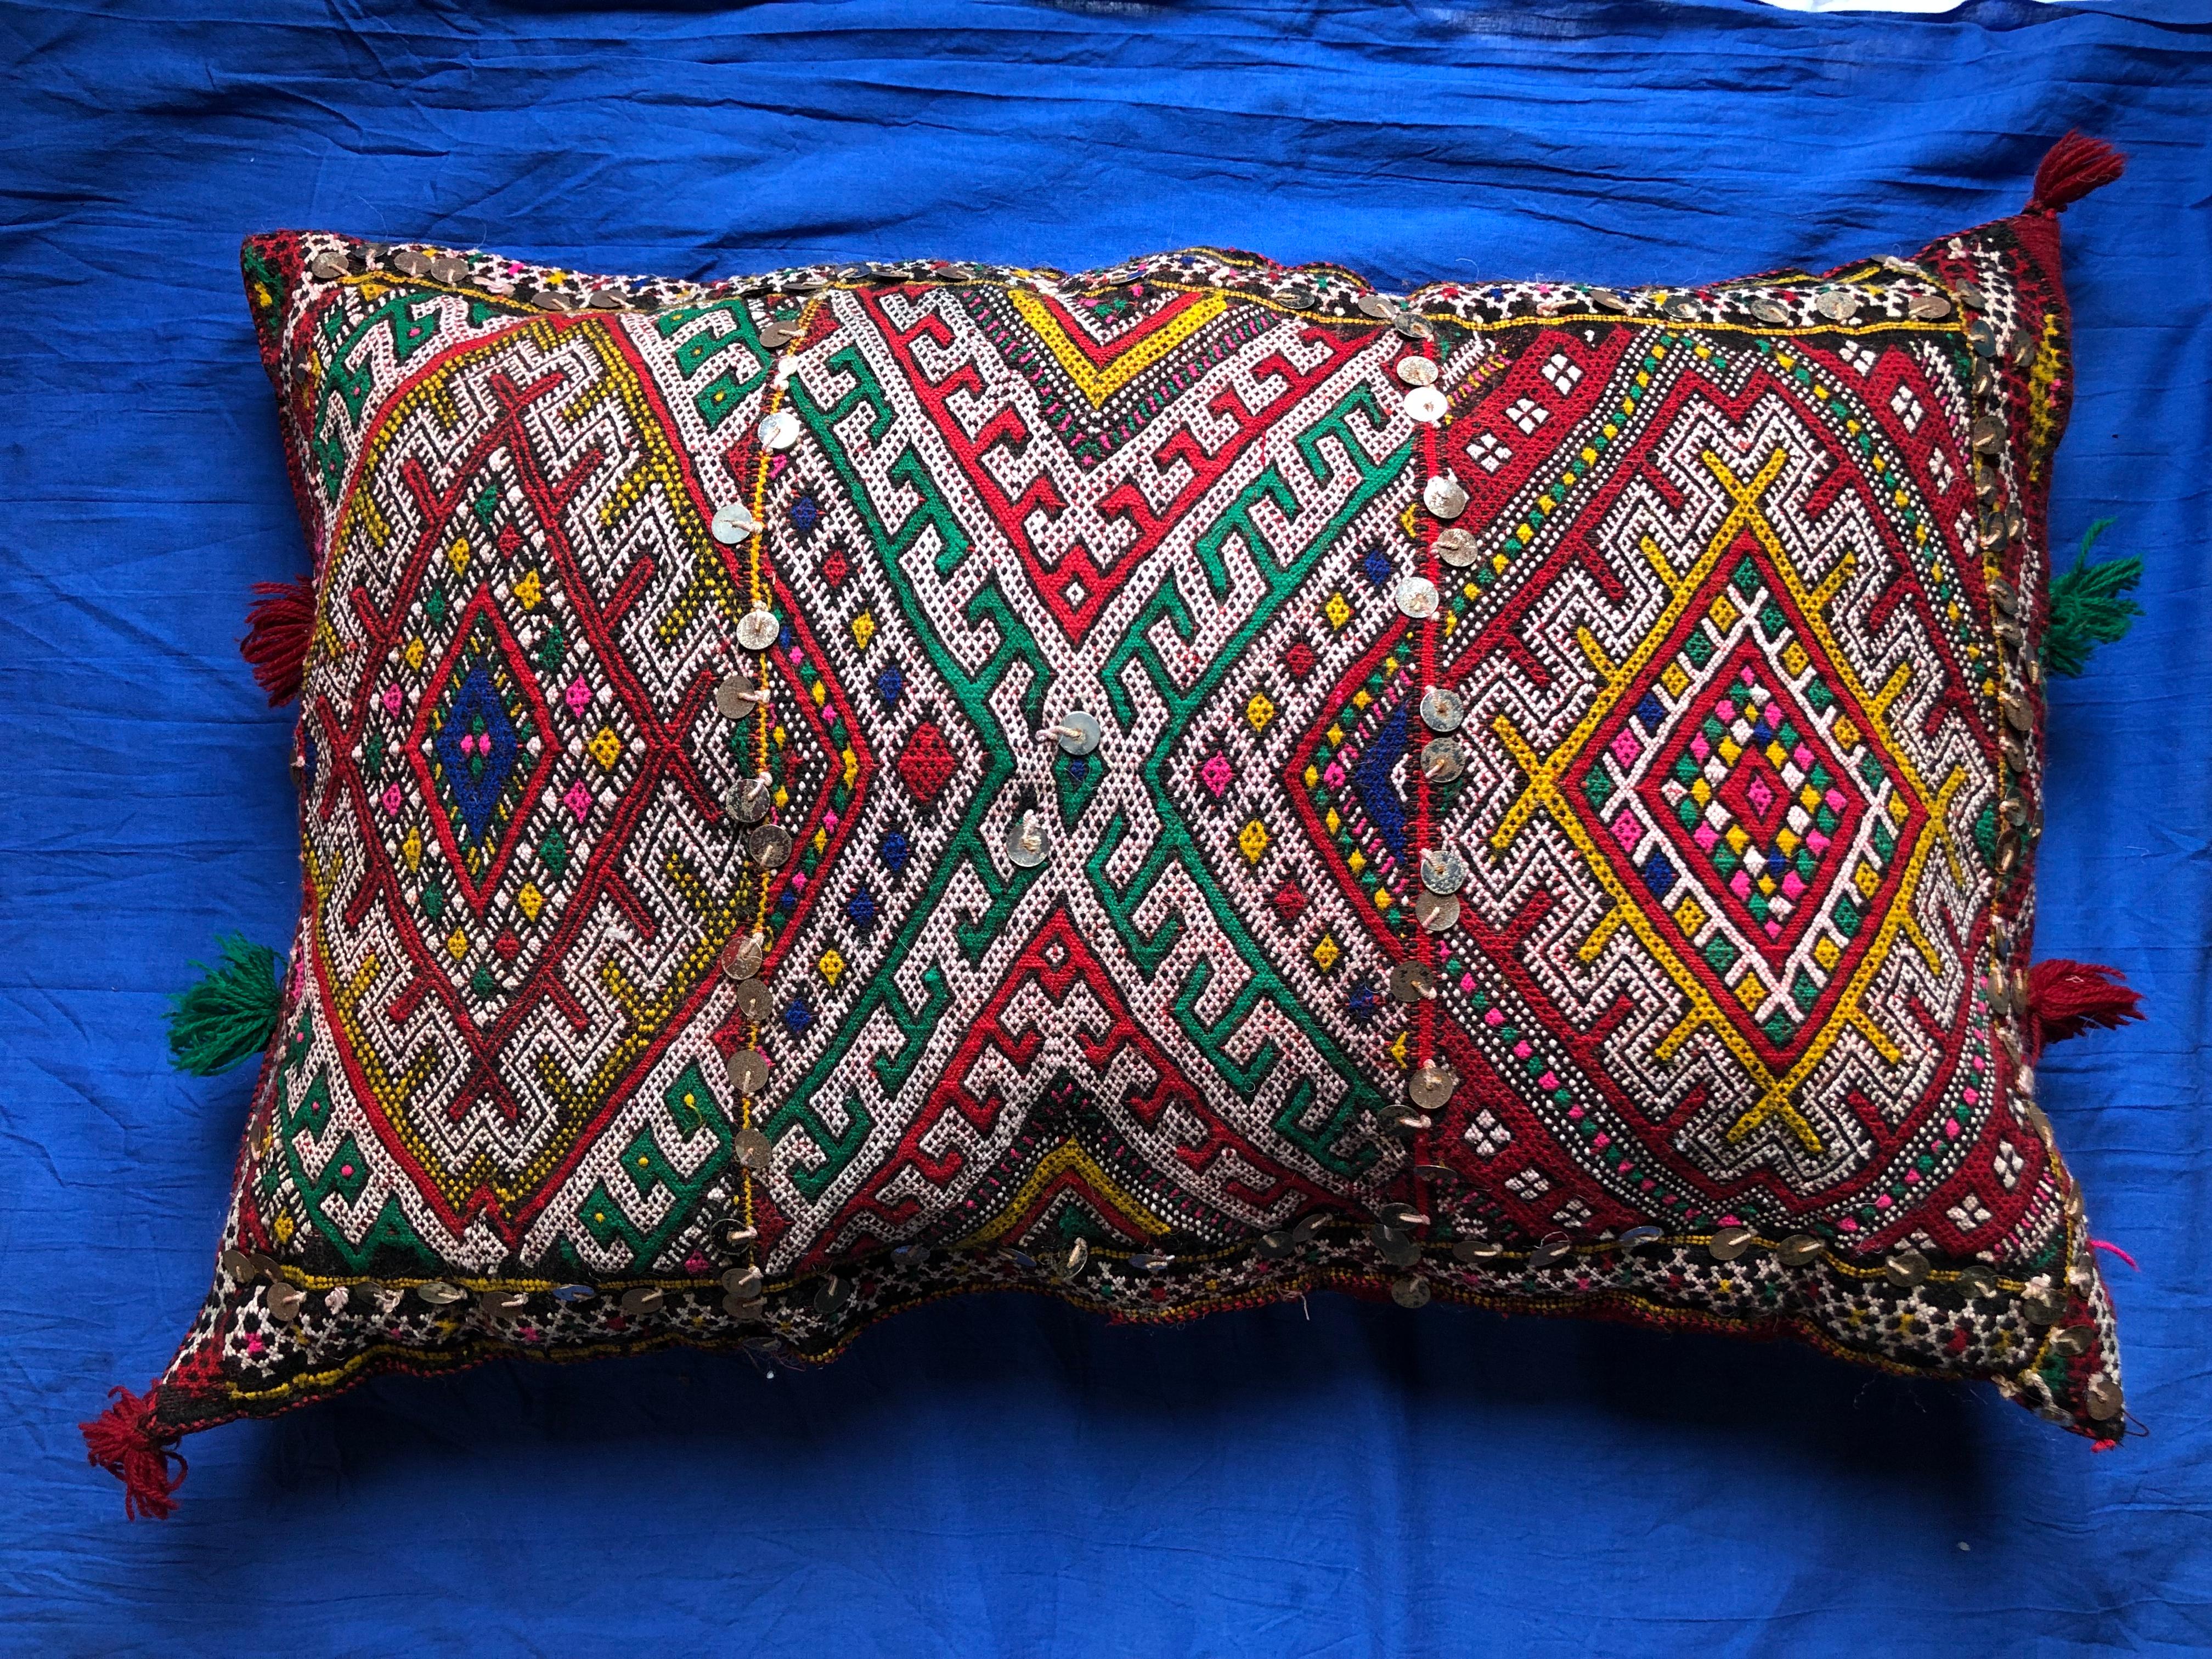 This vibrant, colorful handmade pillow adds an exotic bohemian feel to any room. Decorated with geometric designs that mimic Berber tribal tattoos, as well as other symbolic imagery like the evil eye. Each pillow is one-of-a-kind, handwoven by